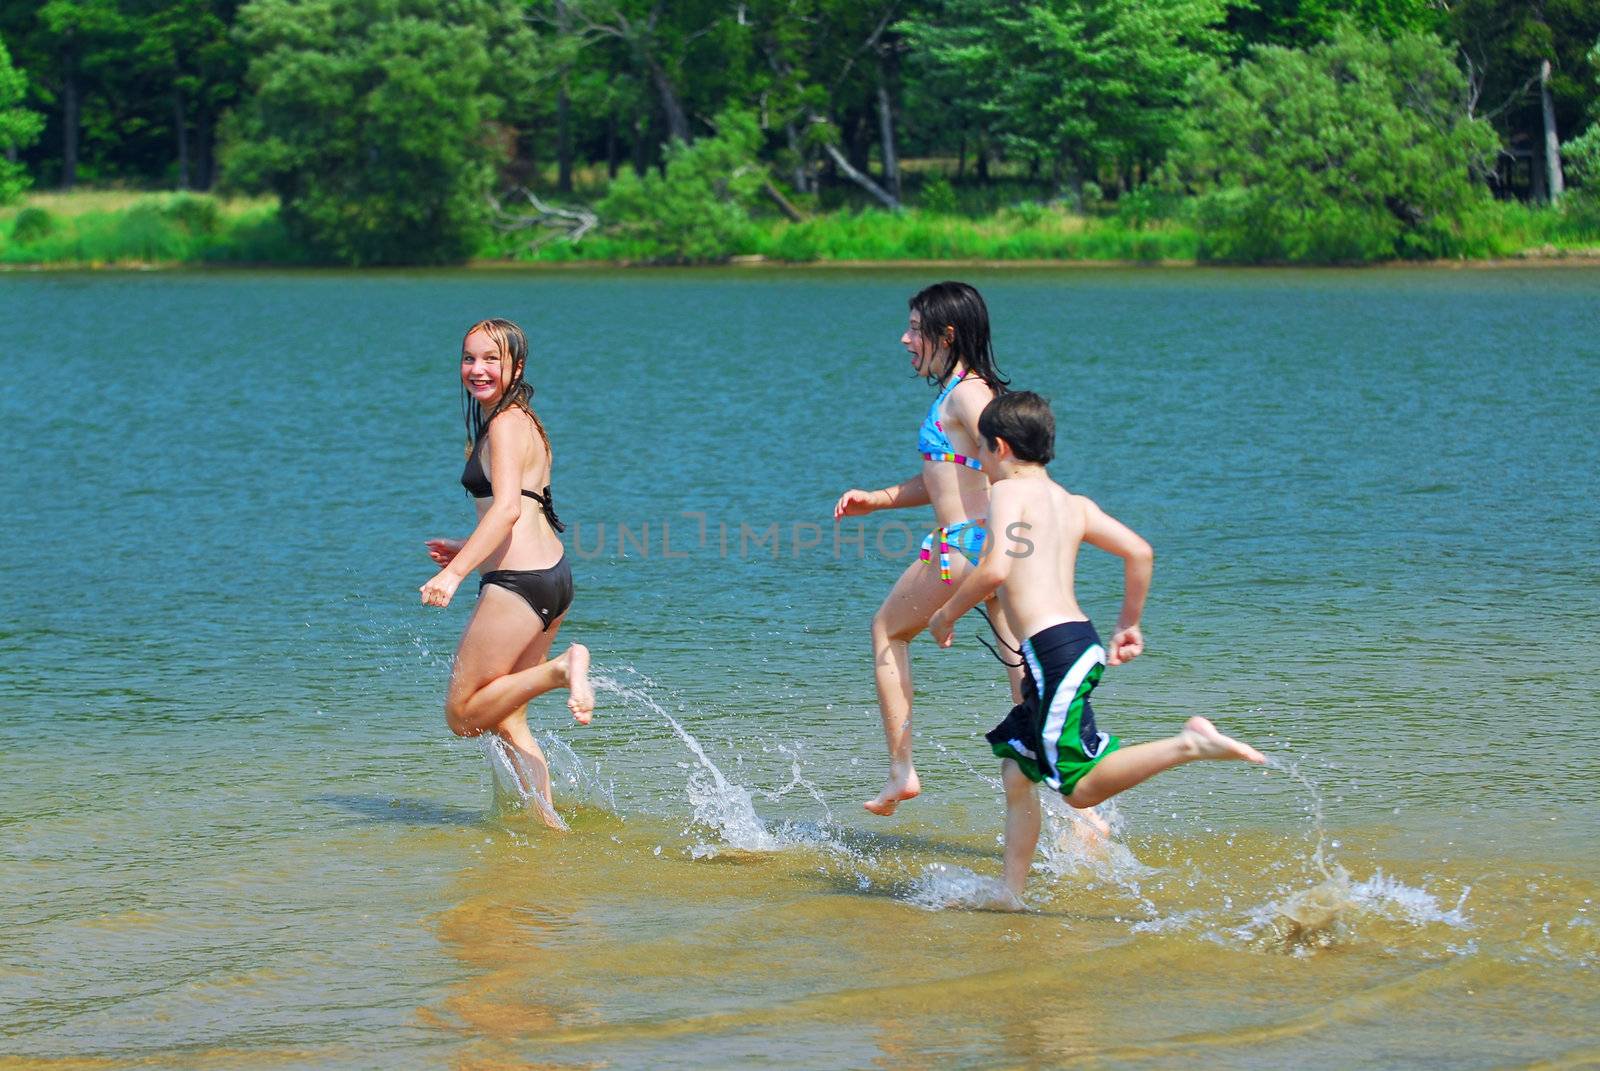 Group of children running into clear lake water